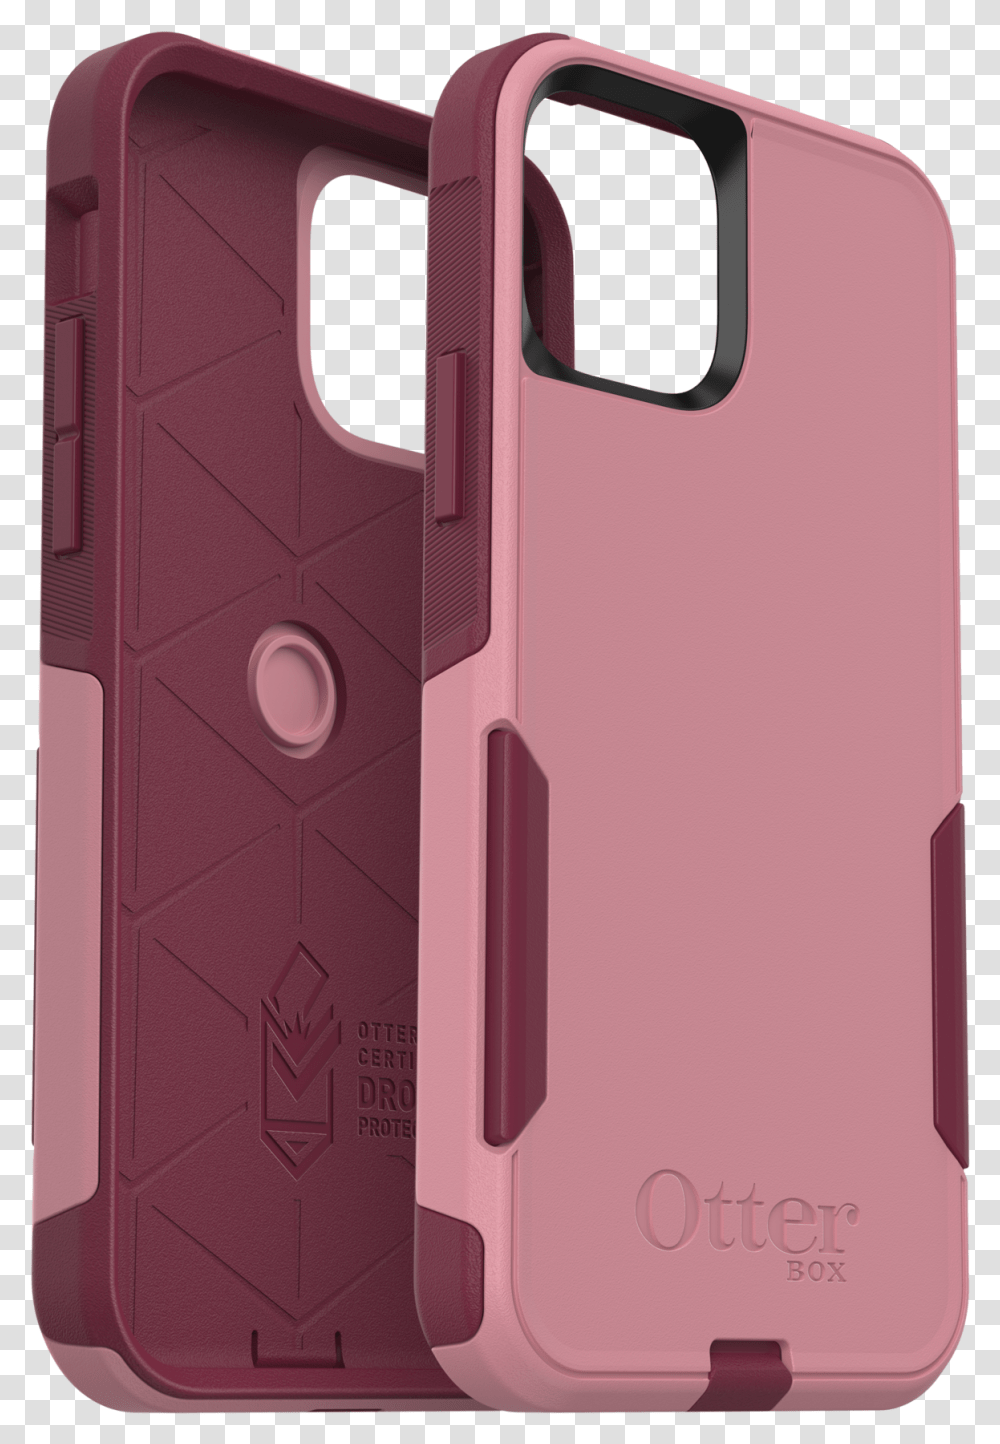 Otterbox Otterbox Iphone Xr Cases Otterbox, Electronics, Mobile Phone, Cell Phone, Train Transparent Png